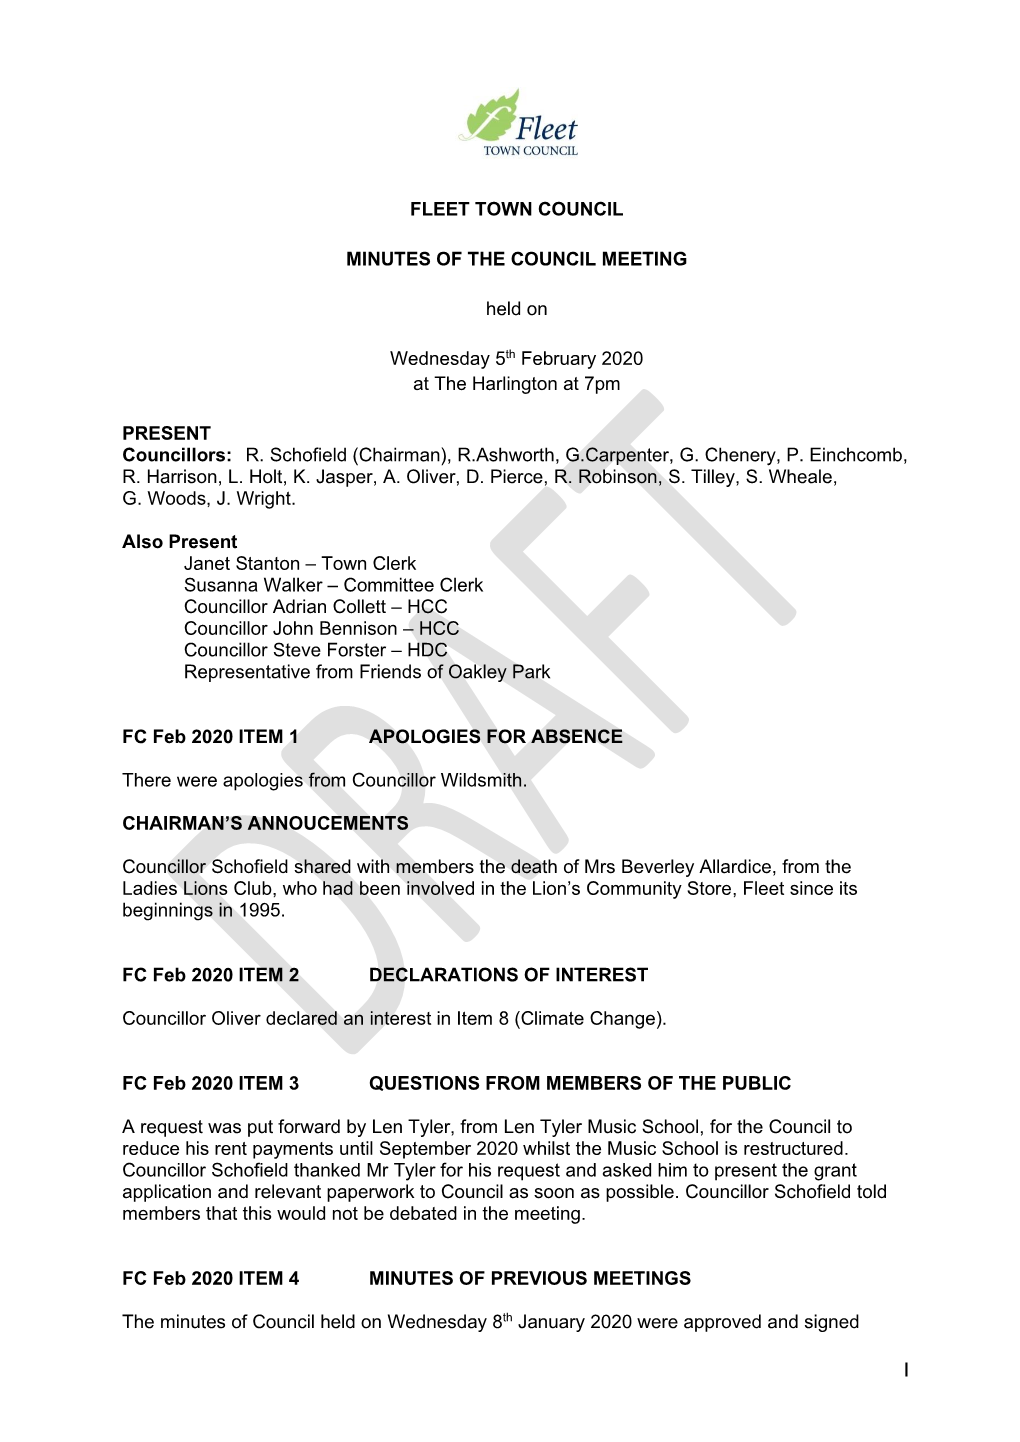 FLEET TOWN COUNCIL MINUTES of the COUNCIL MEETING Held on Wednesday 5Th February 2020 at the Harlington at 7Pm PRESENT Counc